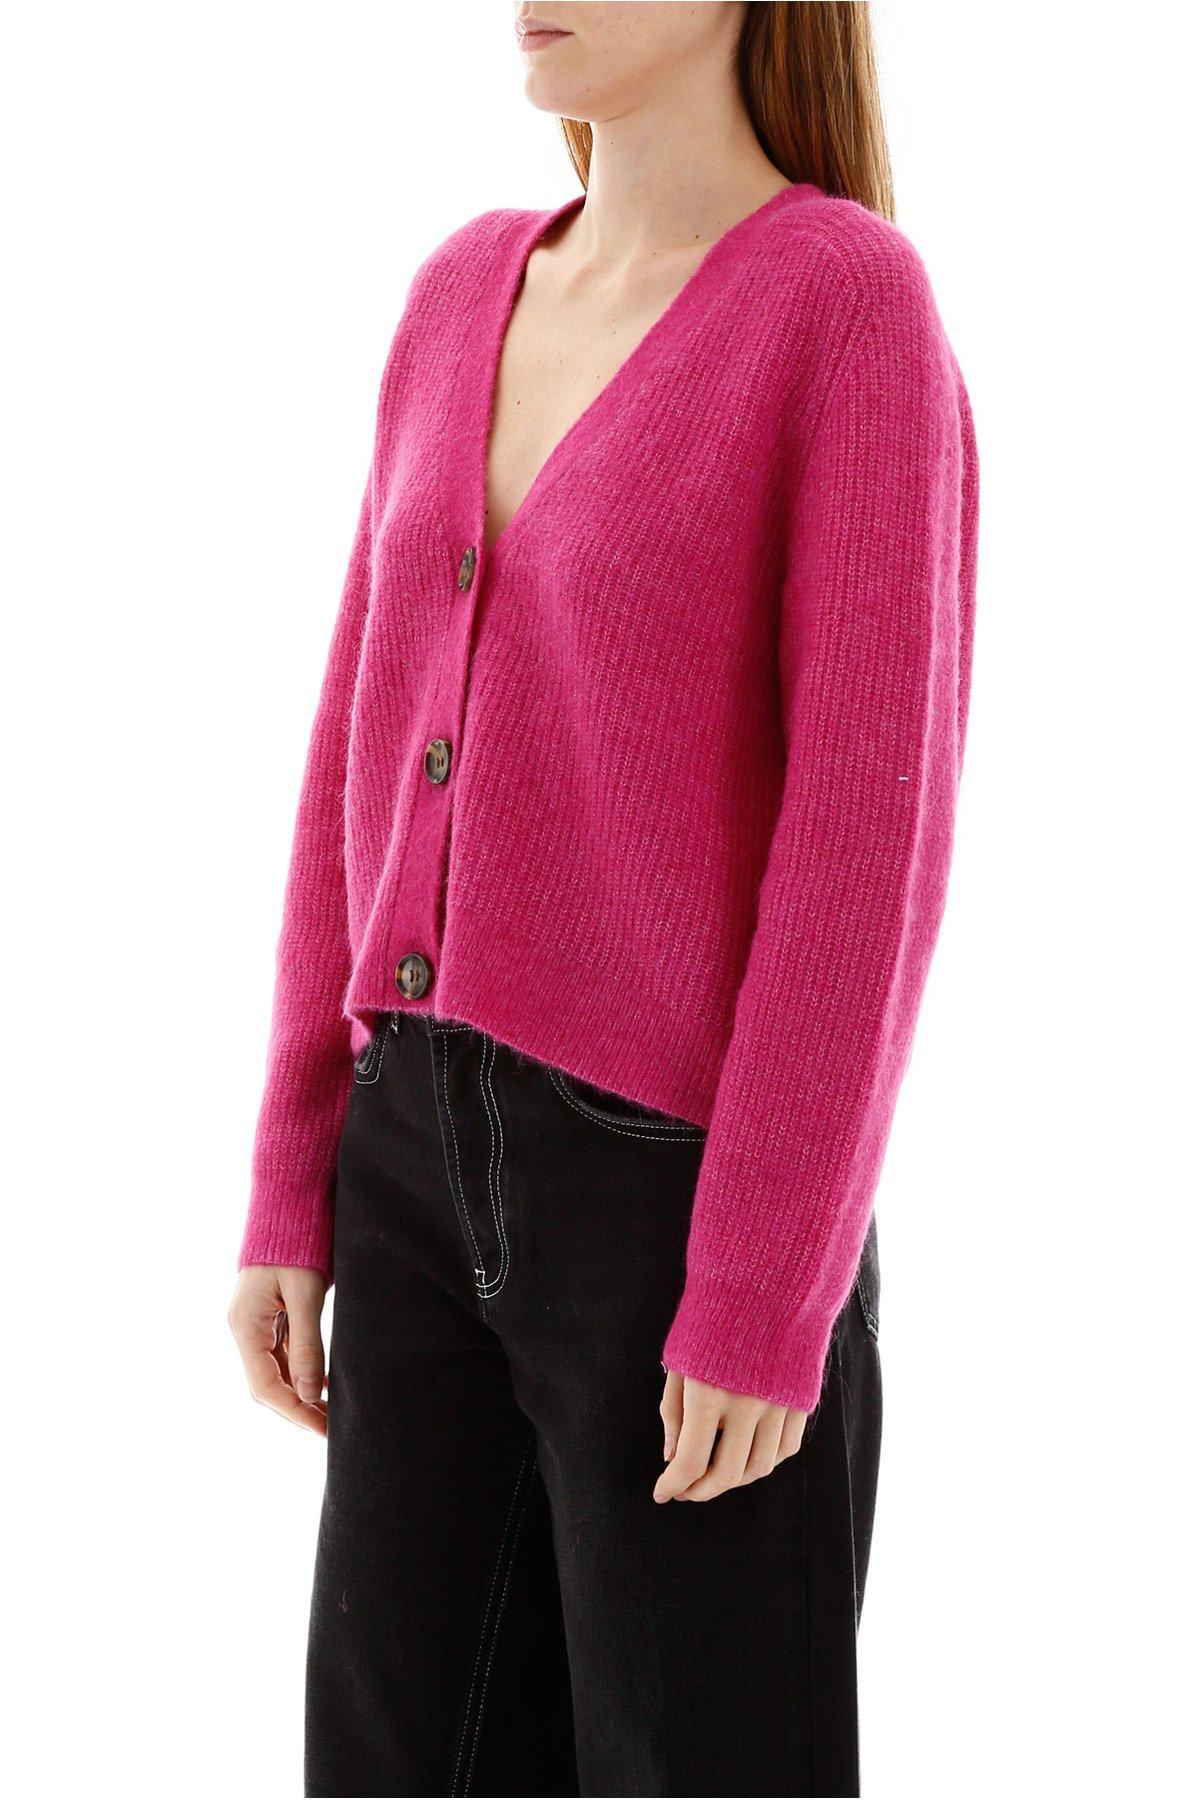 Ganni Ribbed Knitted Cardigan in Pink | Lyst